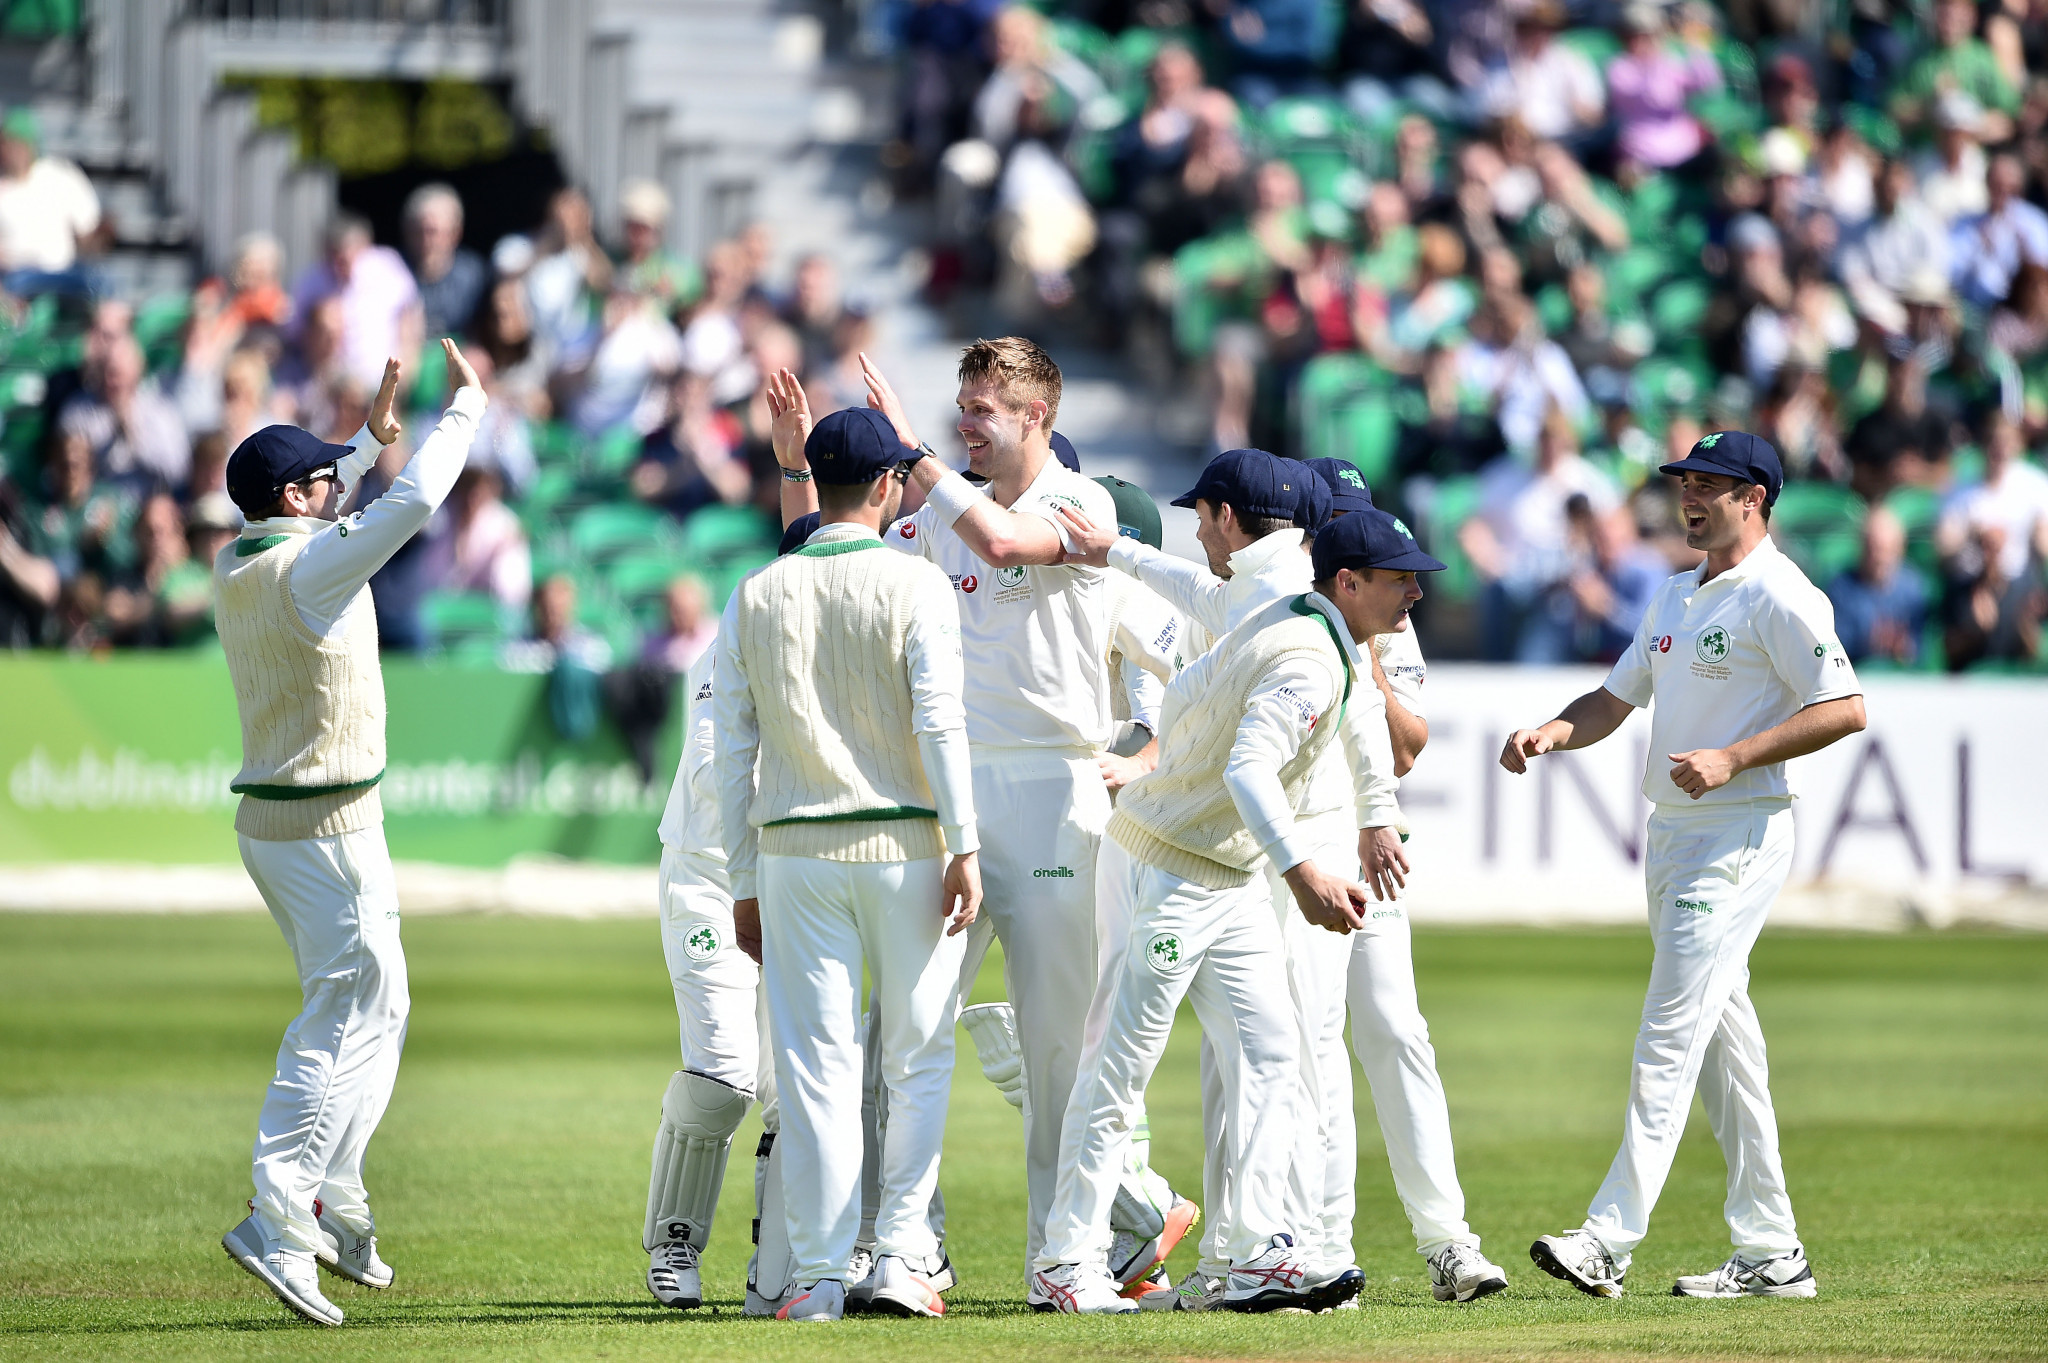 Ireland made a promising start to their Test debut as Pakistan were put under considerable pressure before recovering to reach the close at 268-6 ©Getty Images